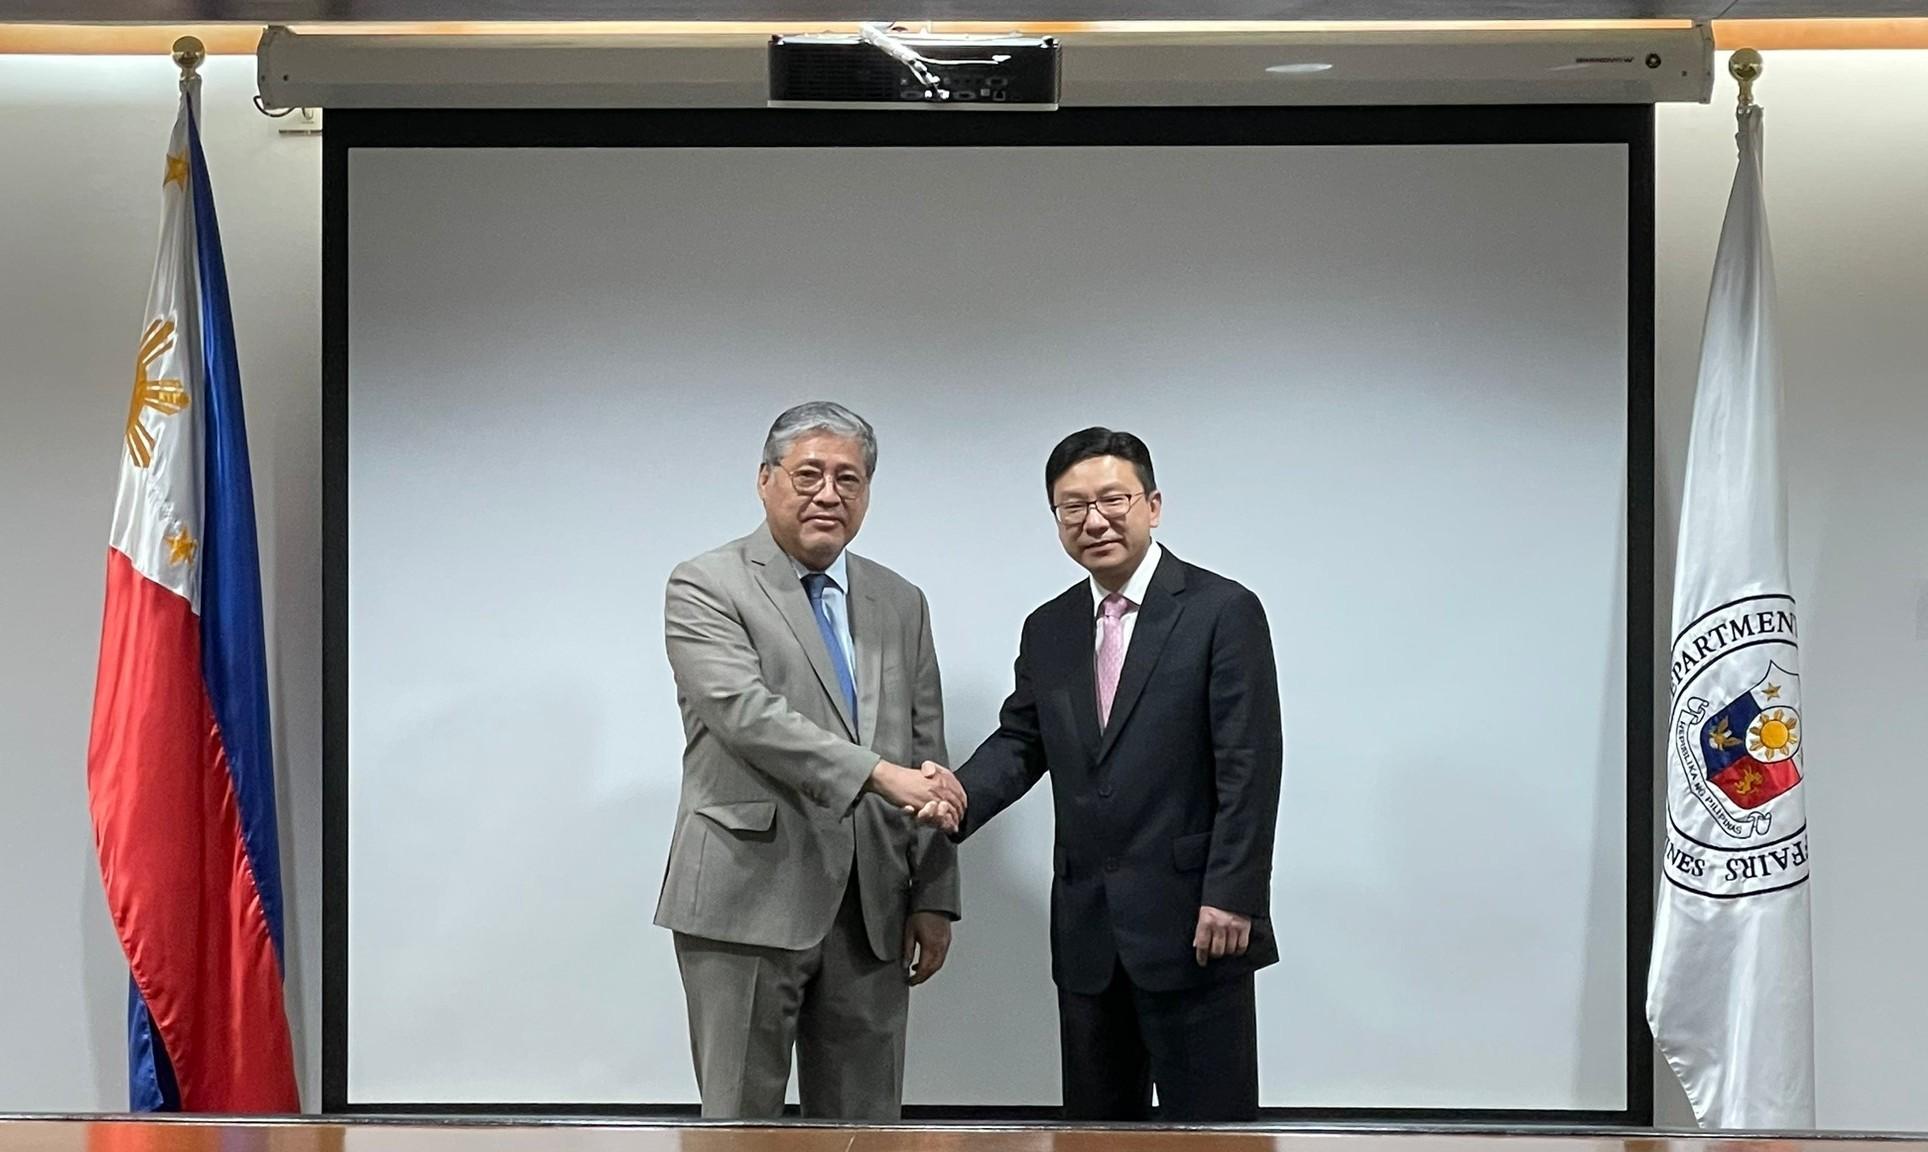 The Secretary for Labour and Welfare, Mr Chris Sun (right), called on the Secretary of Foreign Affairs of the Philippines, Mr Enrique A. Manalo (left), yesterday afternoon (January 9) during his visit to Manila, the Philippines, to exchange views on protecting foreign domestic helpers working in Hong Kong.